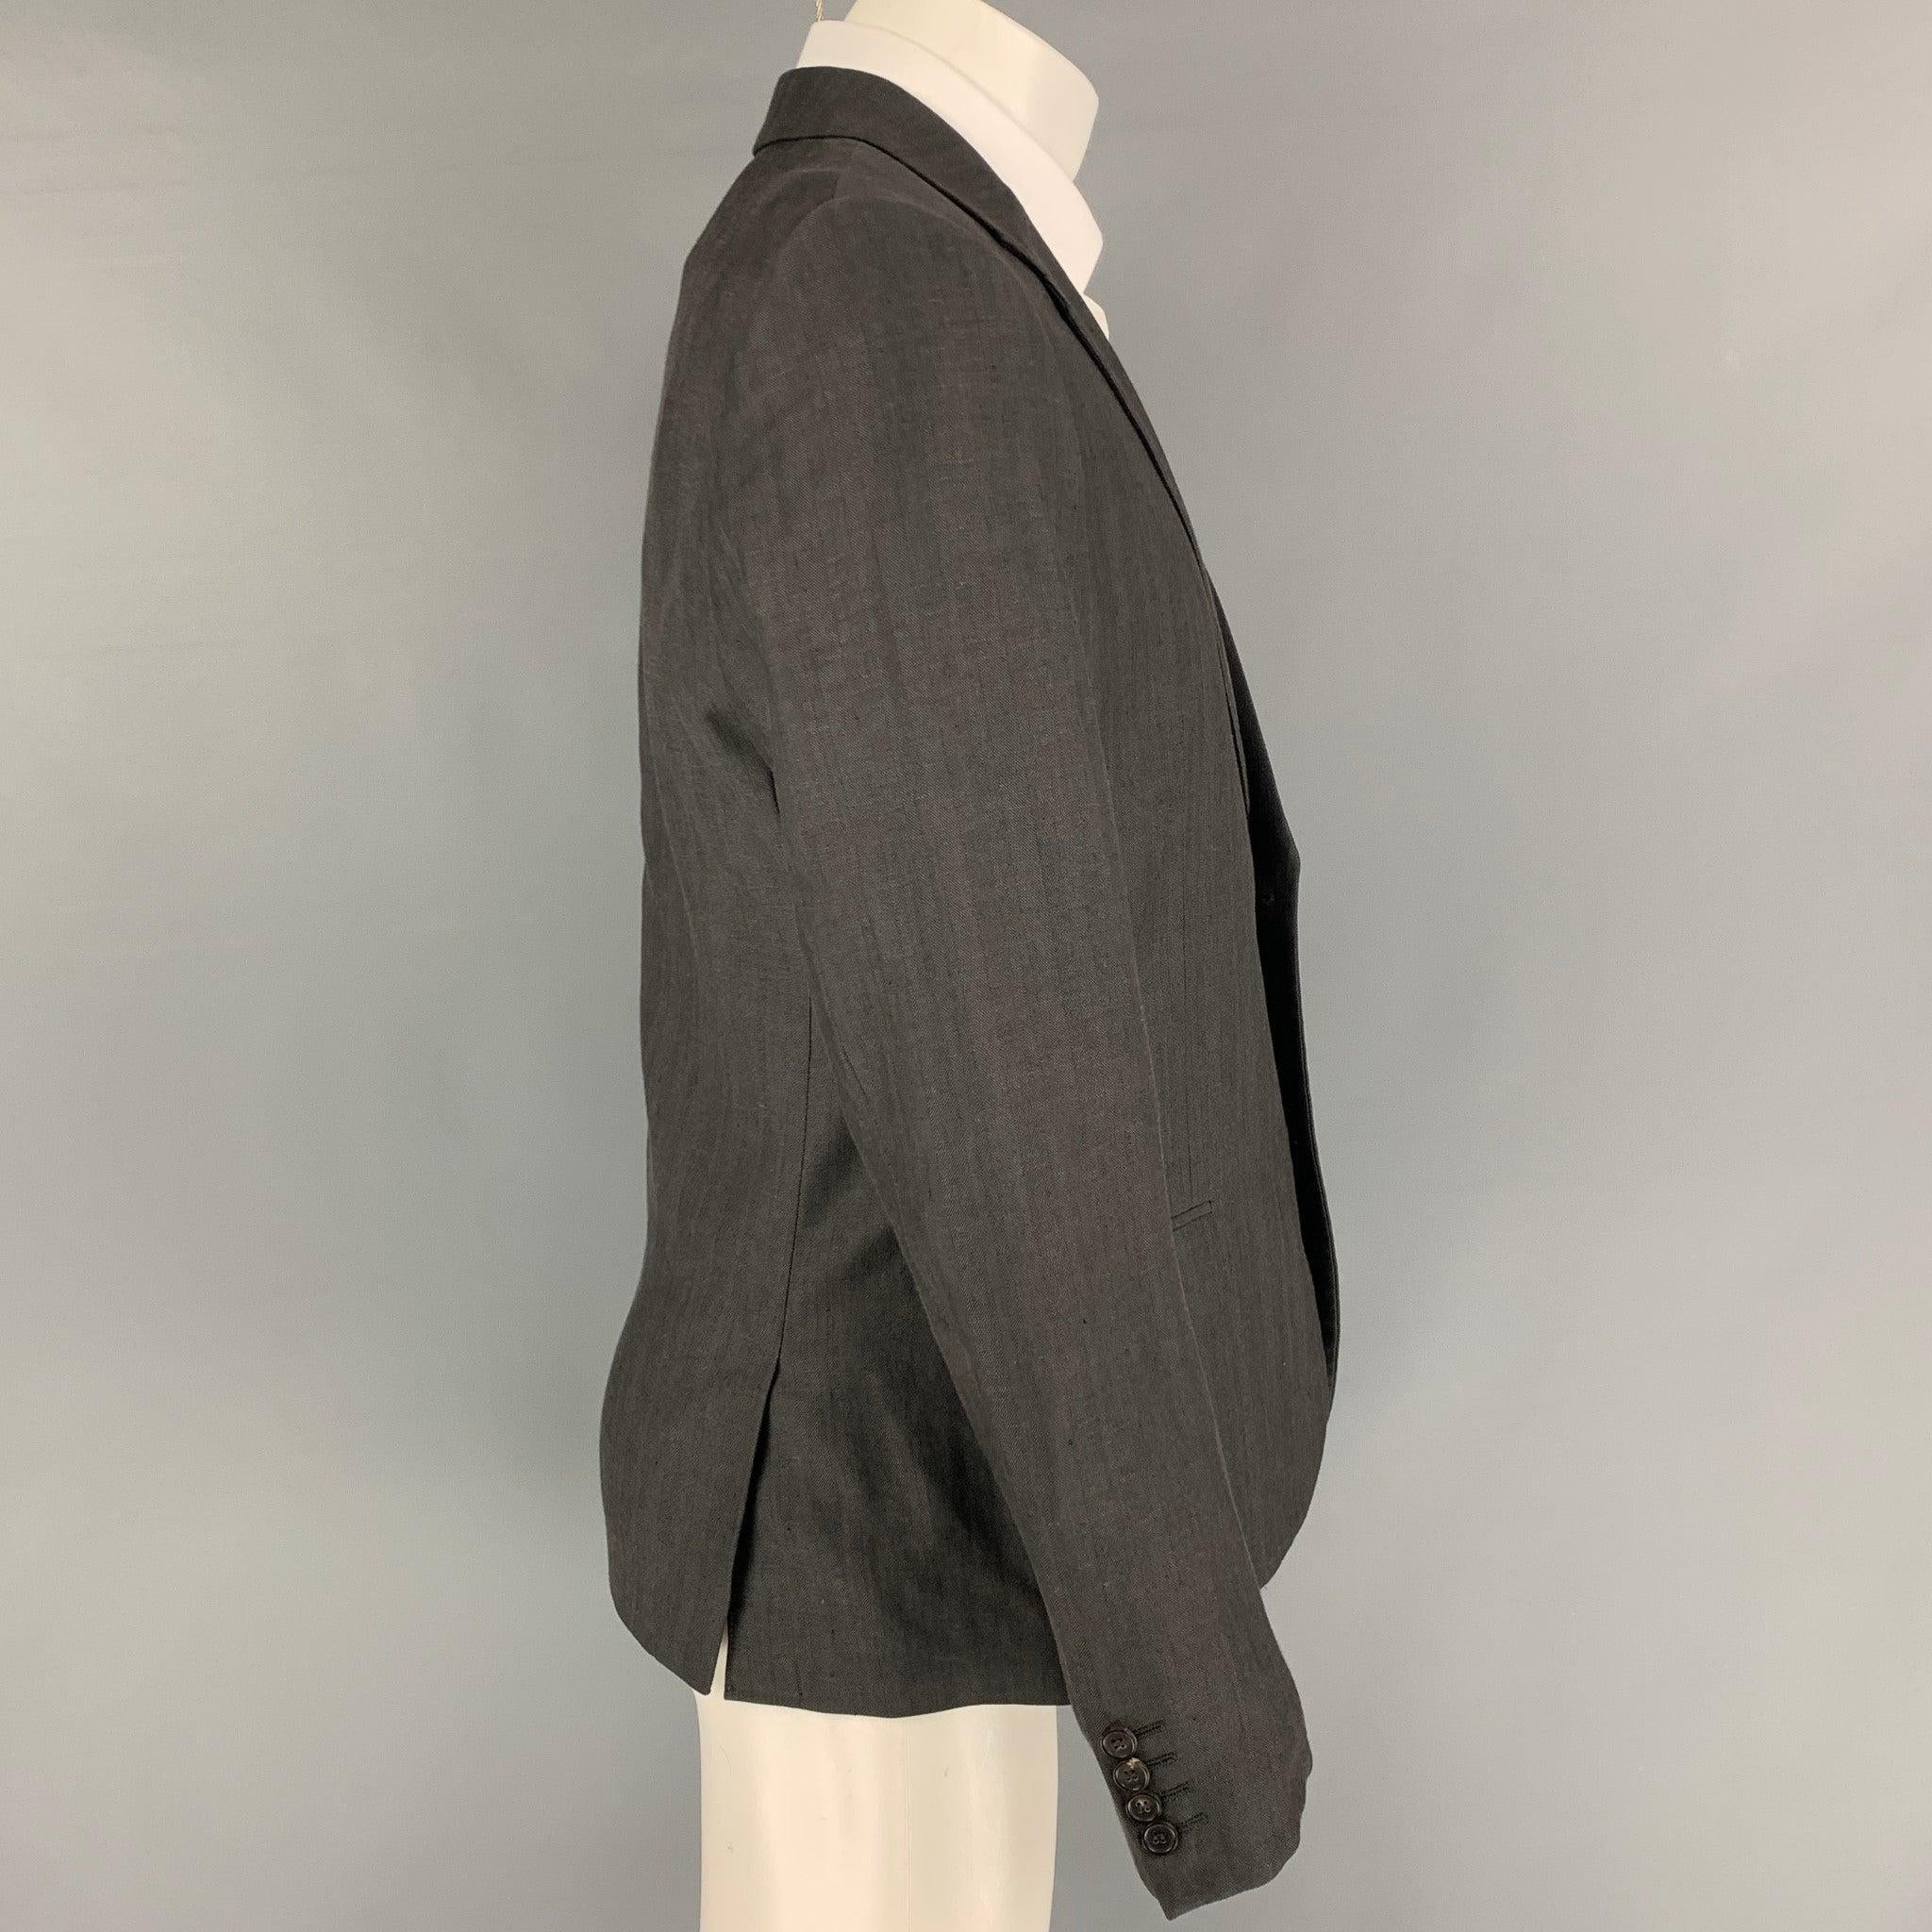 CALVIN KLEIN COLLECTION sport coat comes in a charcoal wool / linen with a full liner featuring a notch lapel, flap pockets, double back vent, and a double button closure.
Very Good
Pre-Owned Condition.  

Marked:   48/38 

Measurements: 
